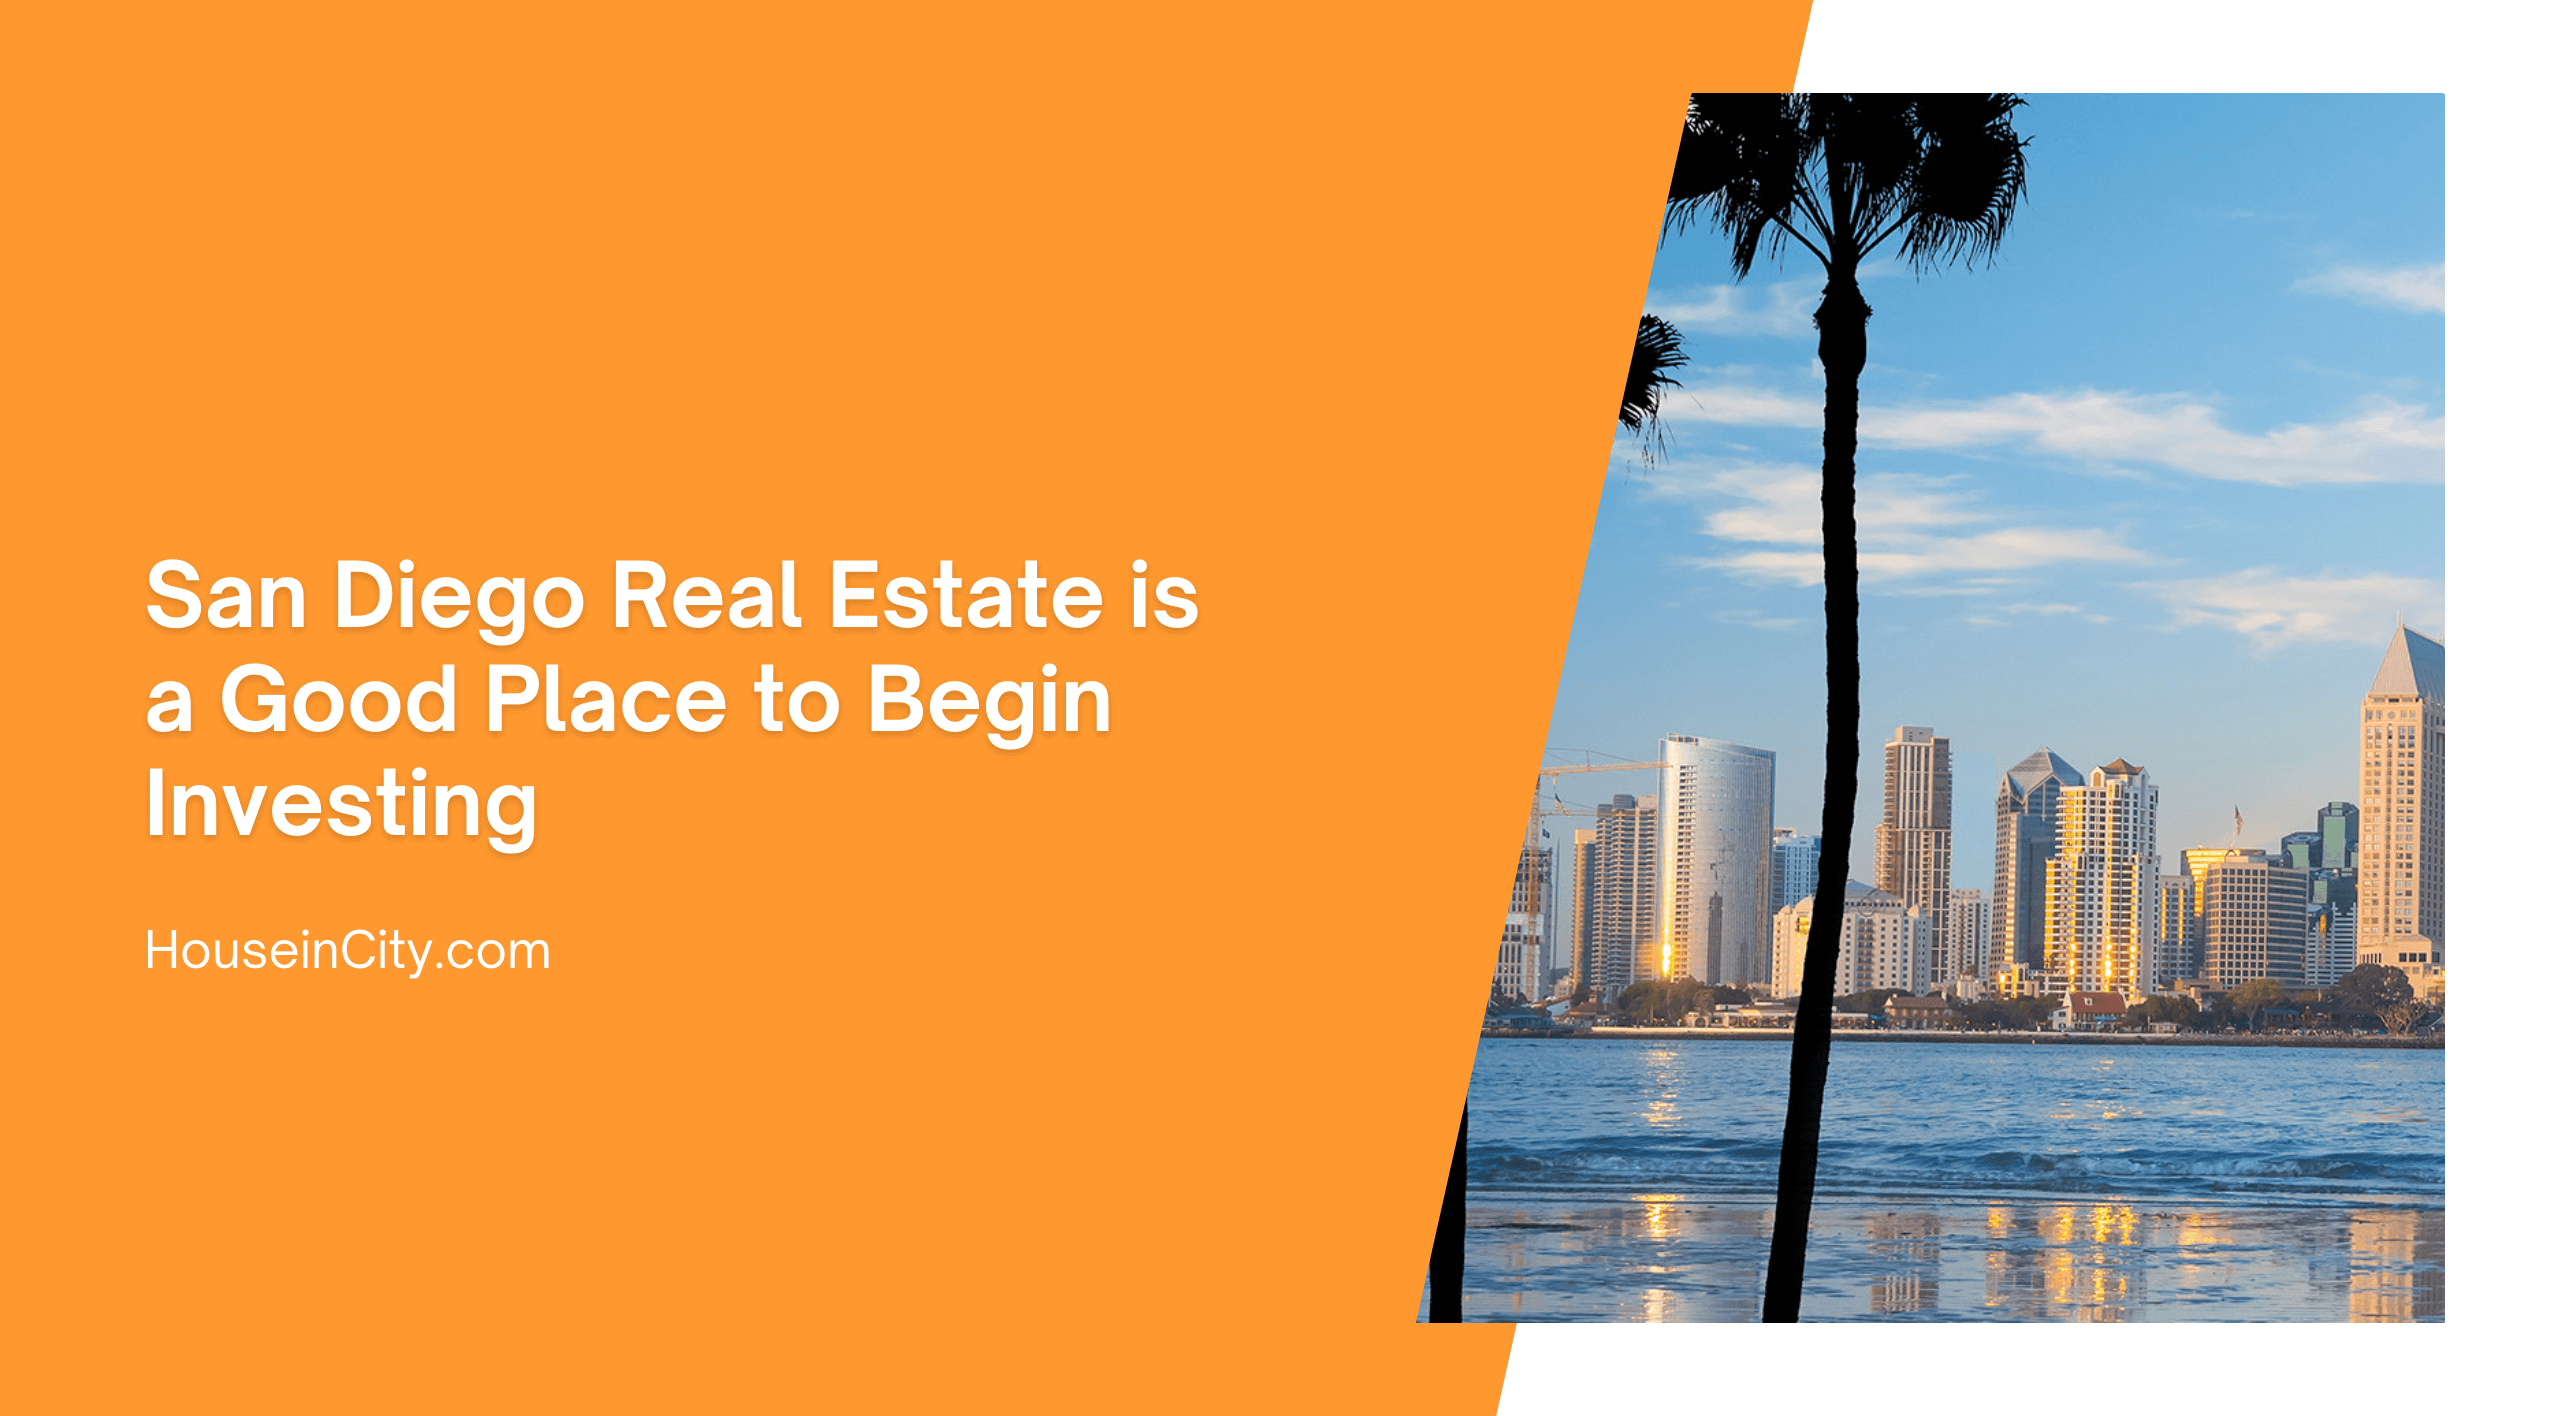 San Diego Real Estate is a Good Place to Begin Investing